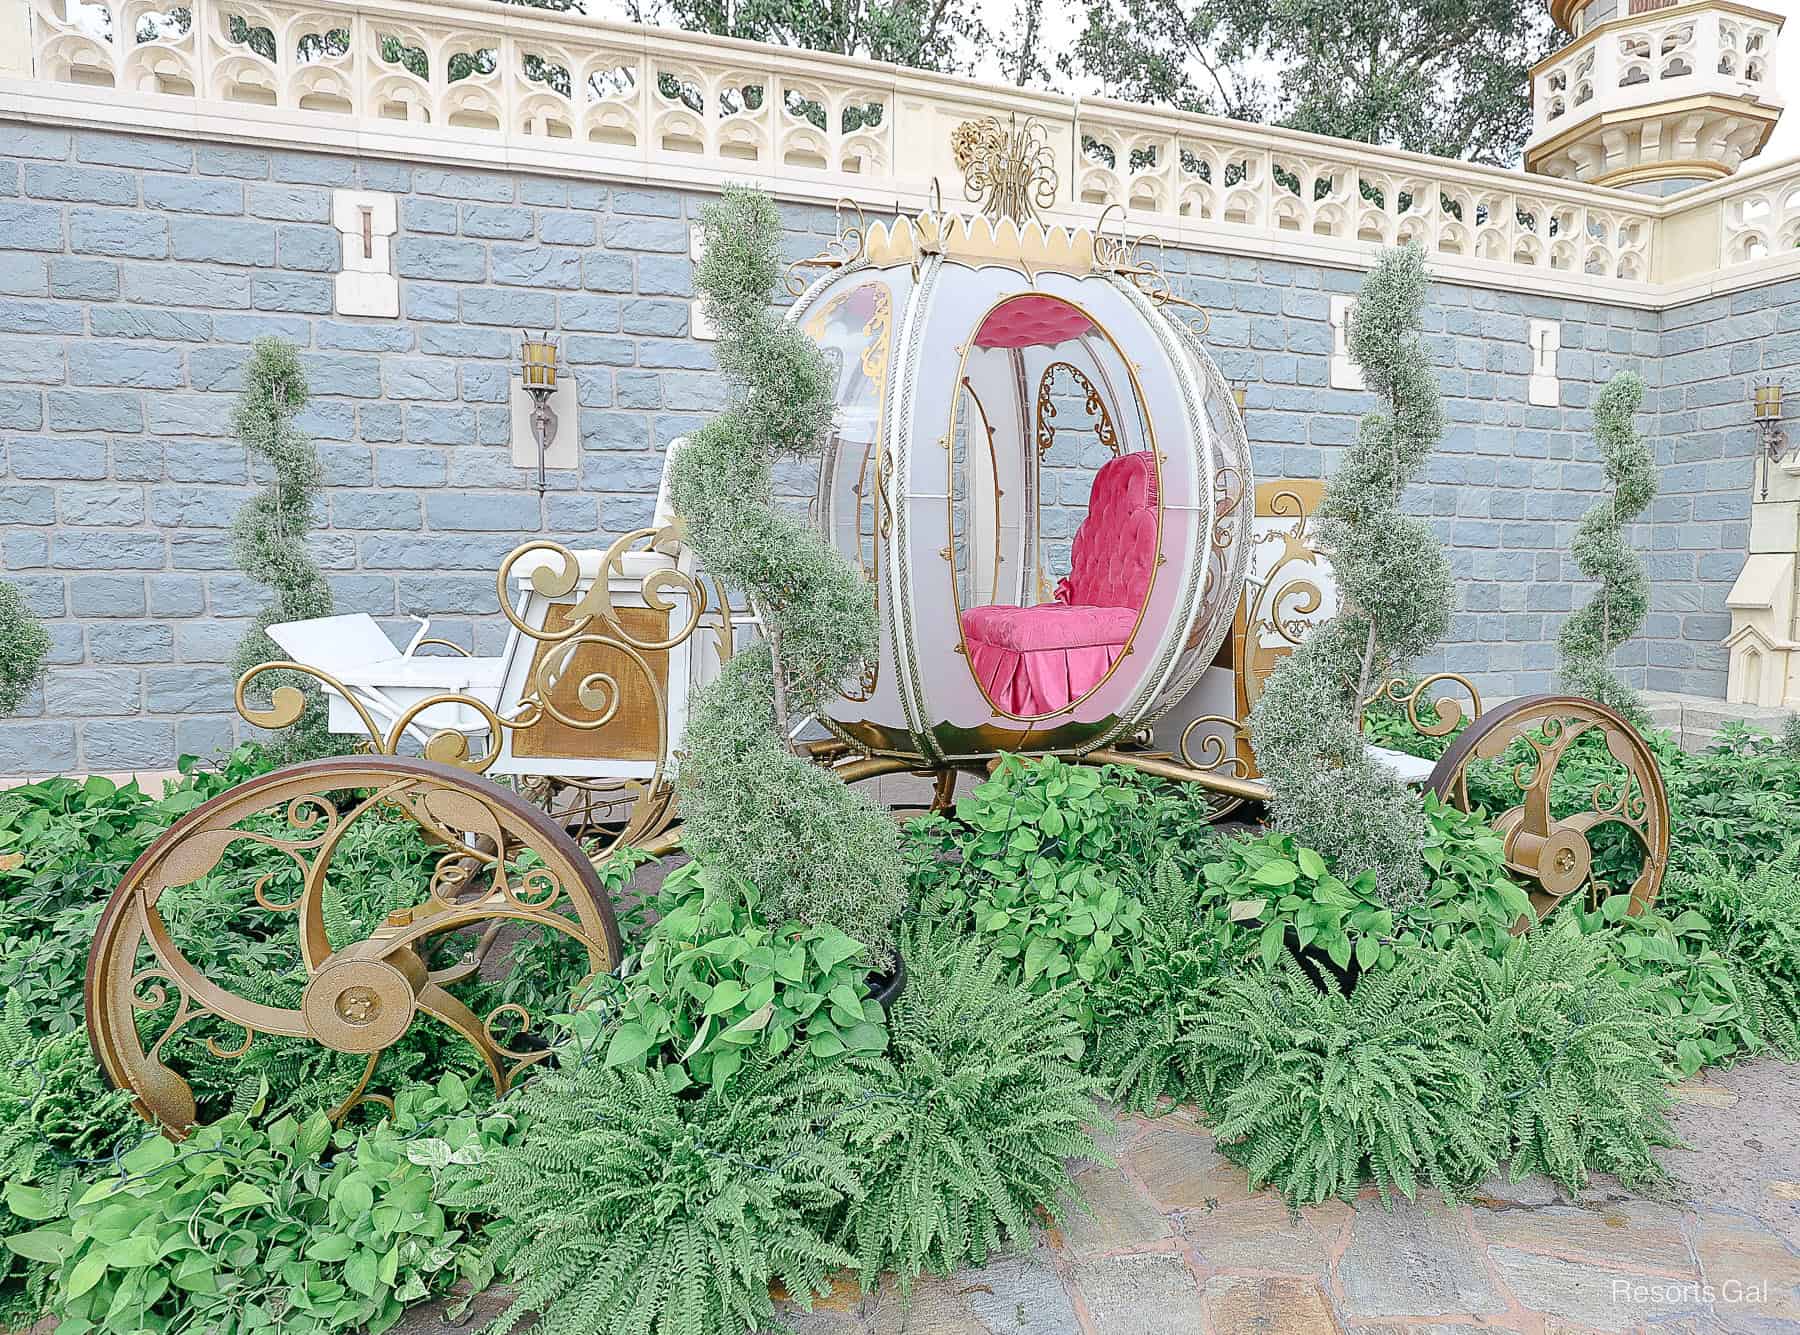 Cinderella's Coach on display as a photo opportunity on the 4th of July 